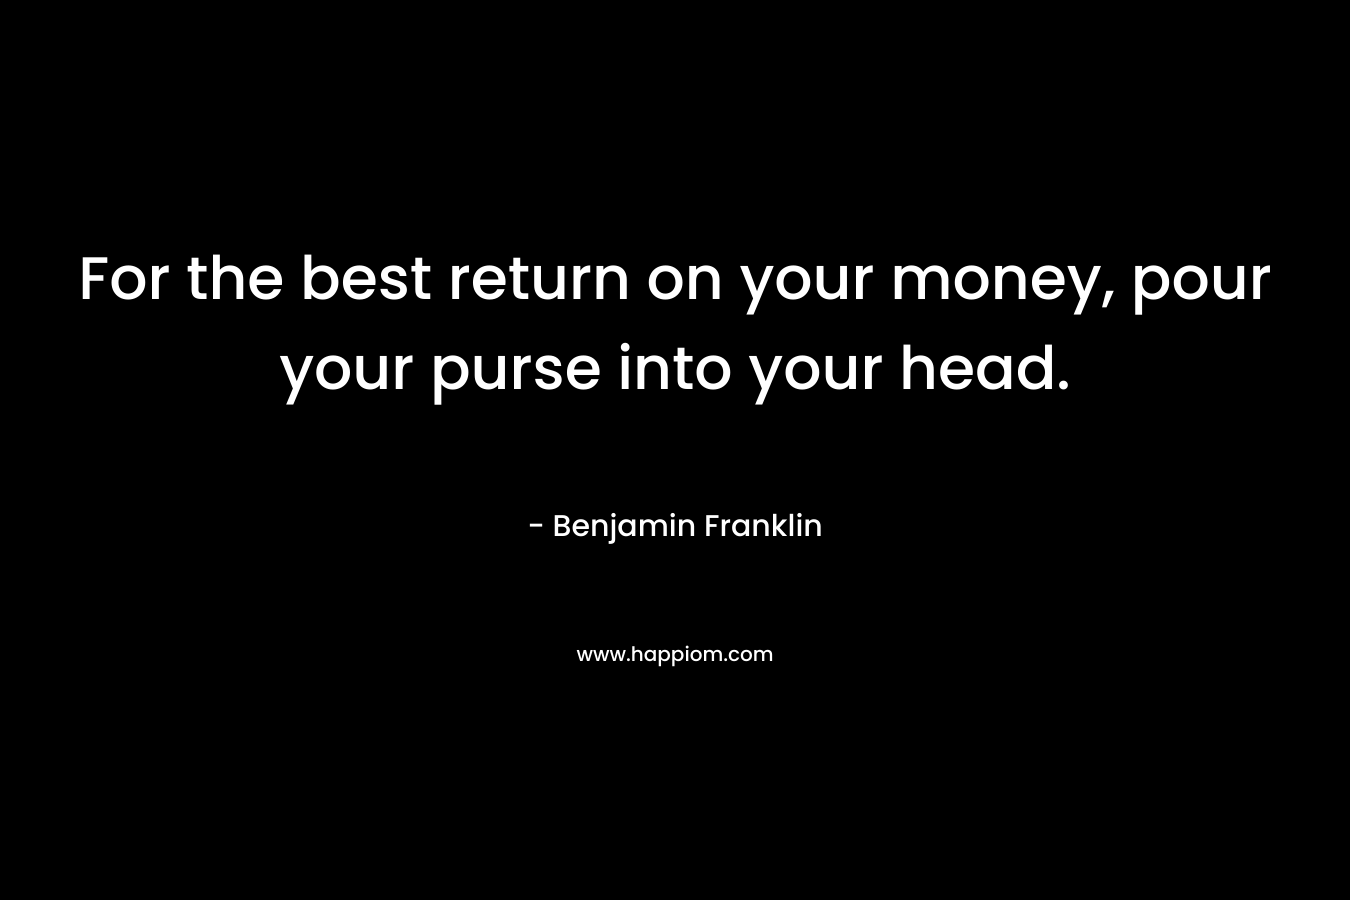 For the best return on your money, pour your purse into your head. – Benjamin Franklin